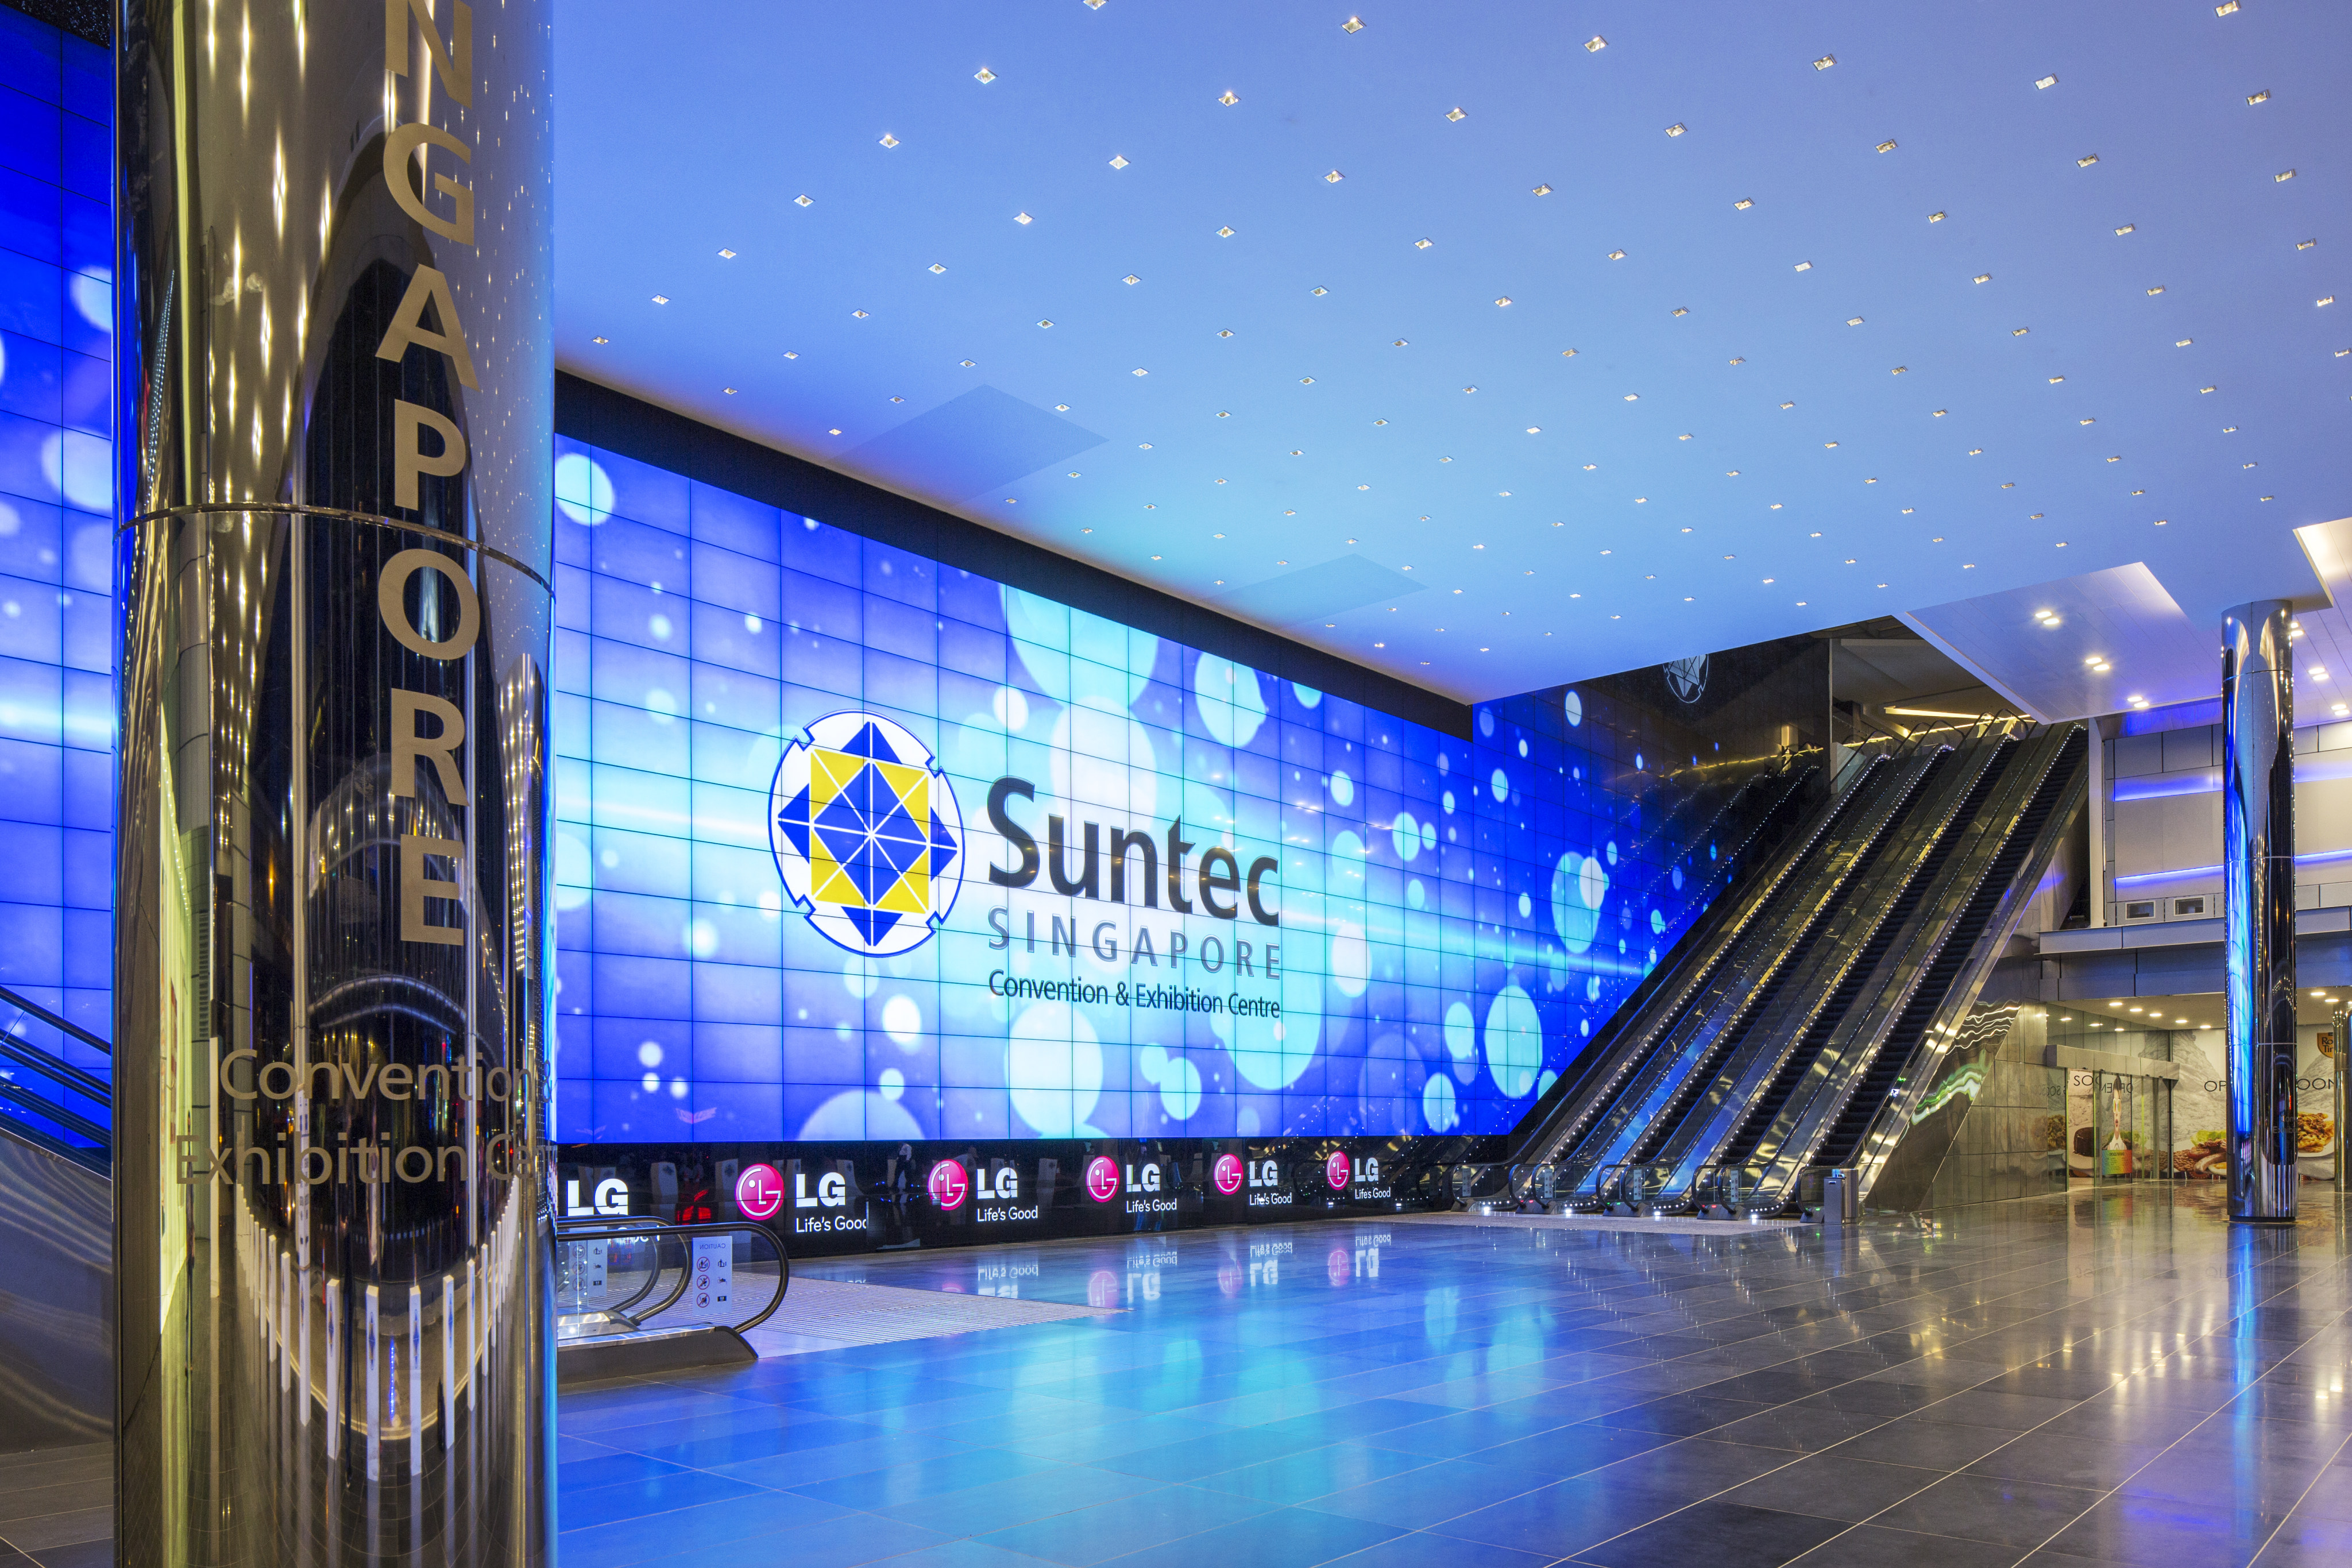 A man was sentenced to five weeks’ jail for molesting a cosplayer at Singapore’s Suntec Convention Centre. Photo: Handout
